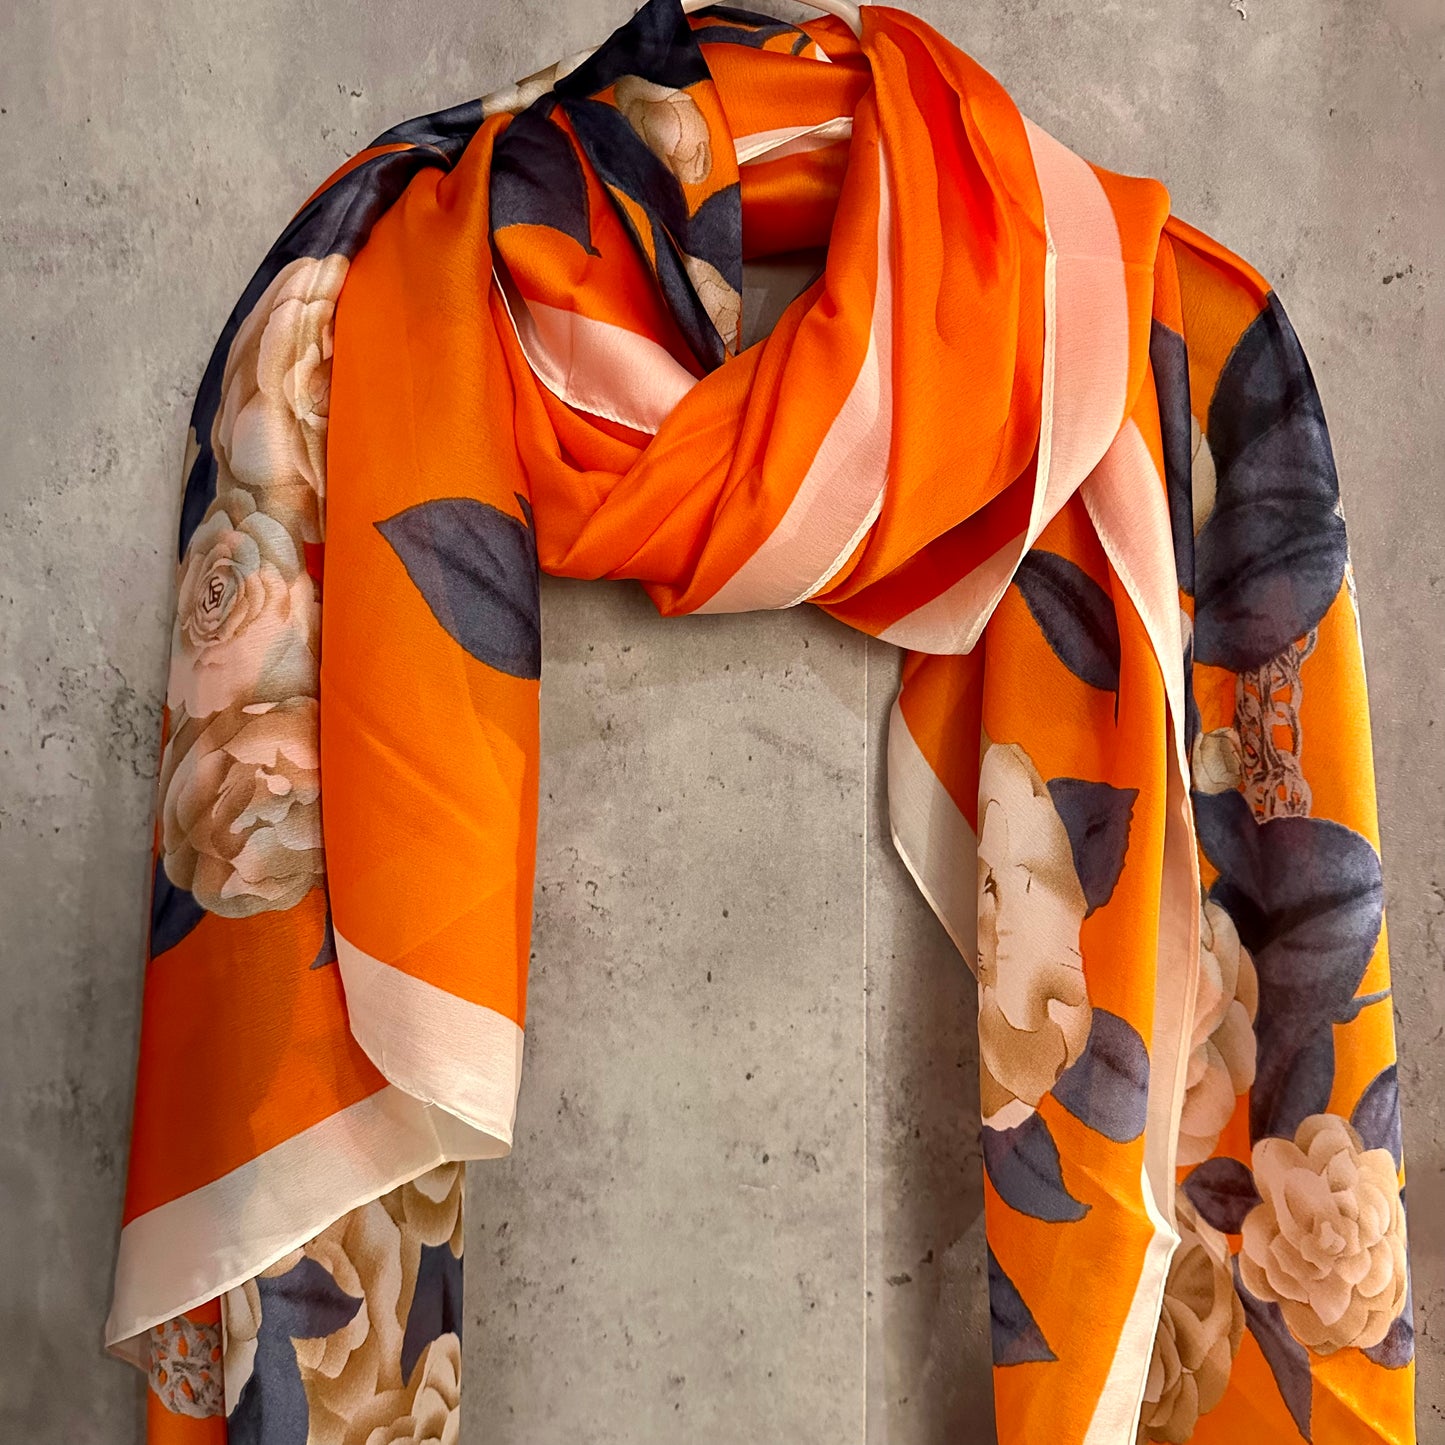 White Roses Pattern Orange Silk Scarf/Spring Summer Scarf/Gifts For Mom/Scarf Women/Gifts For Her Birthday Christmas/UK Seller